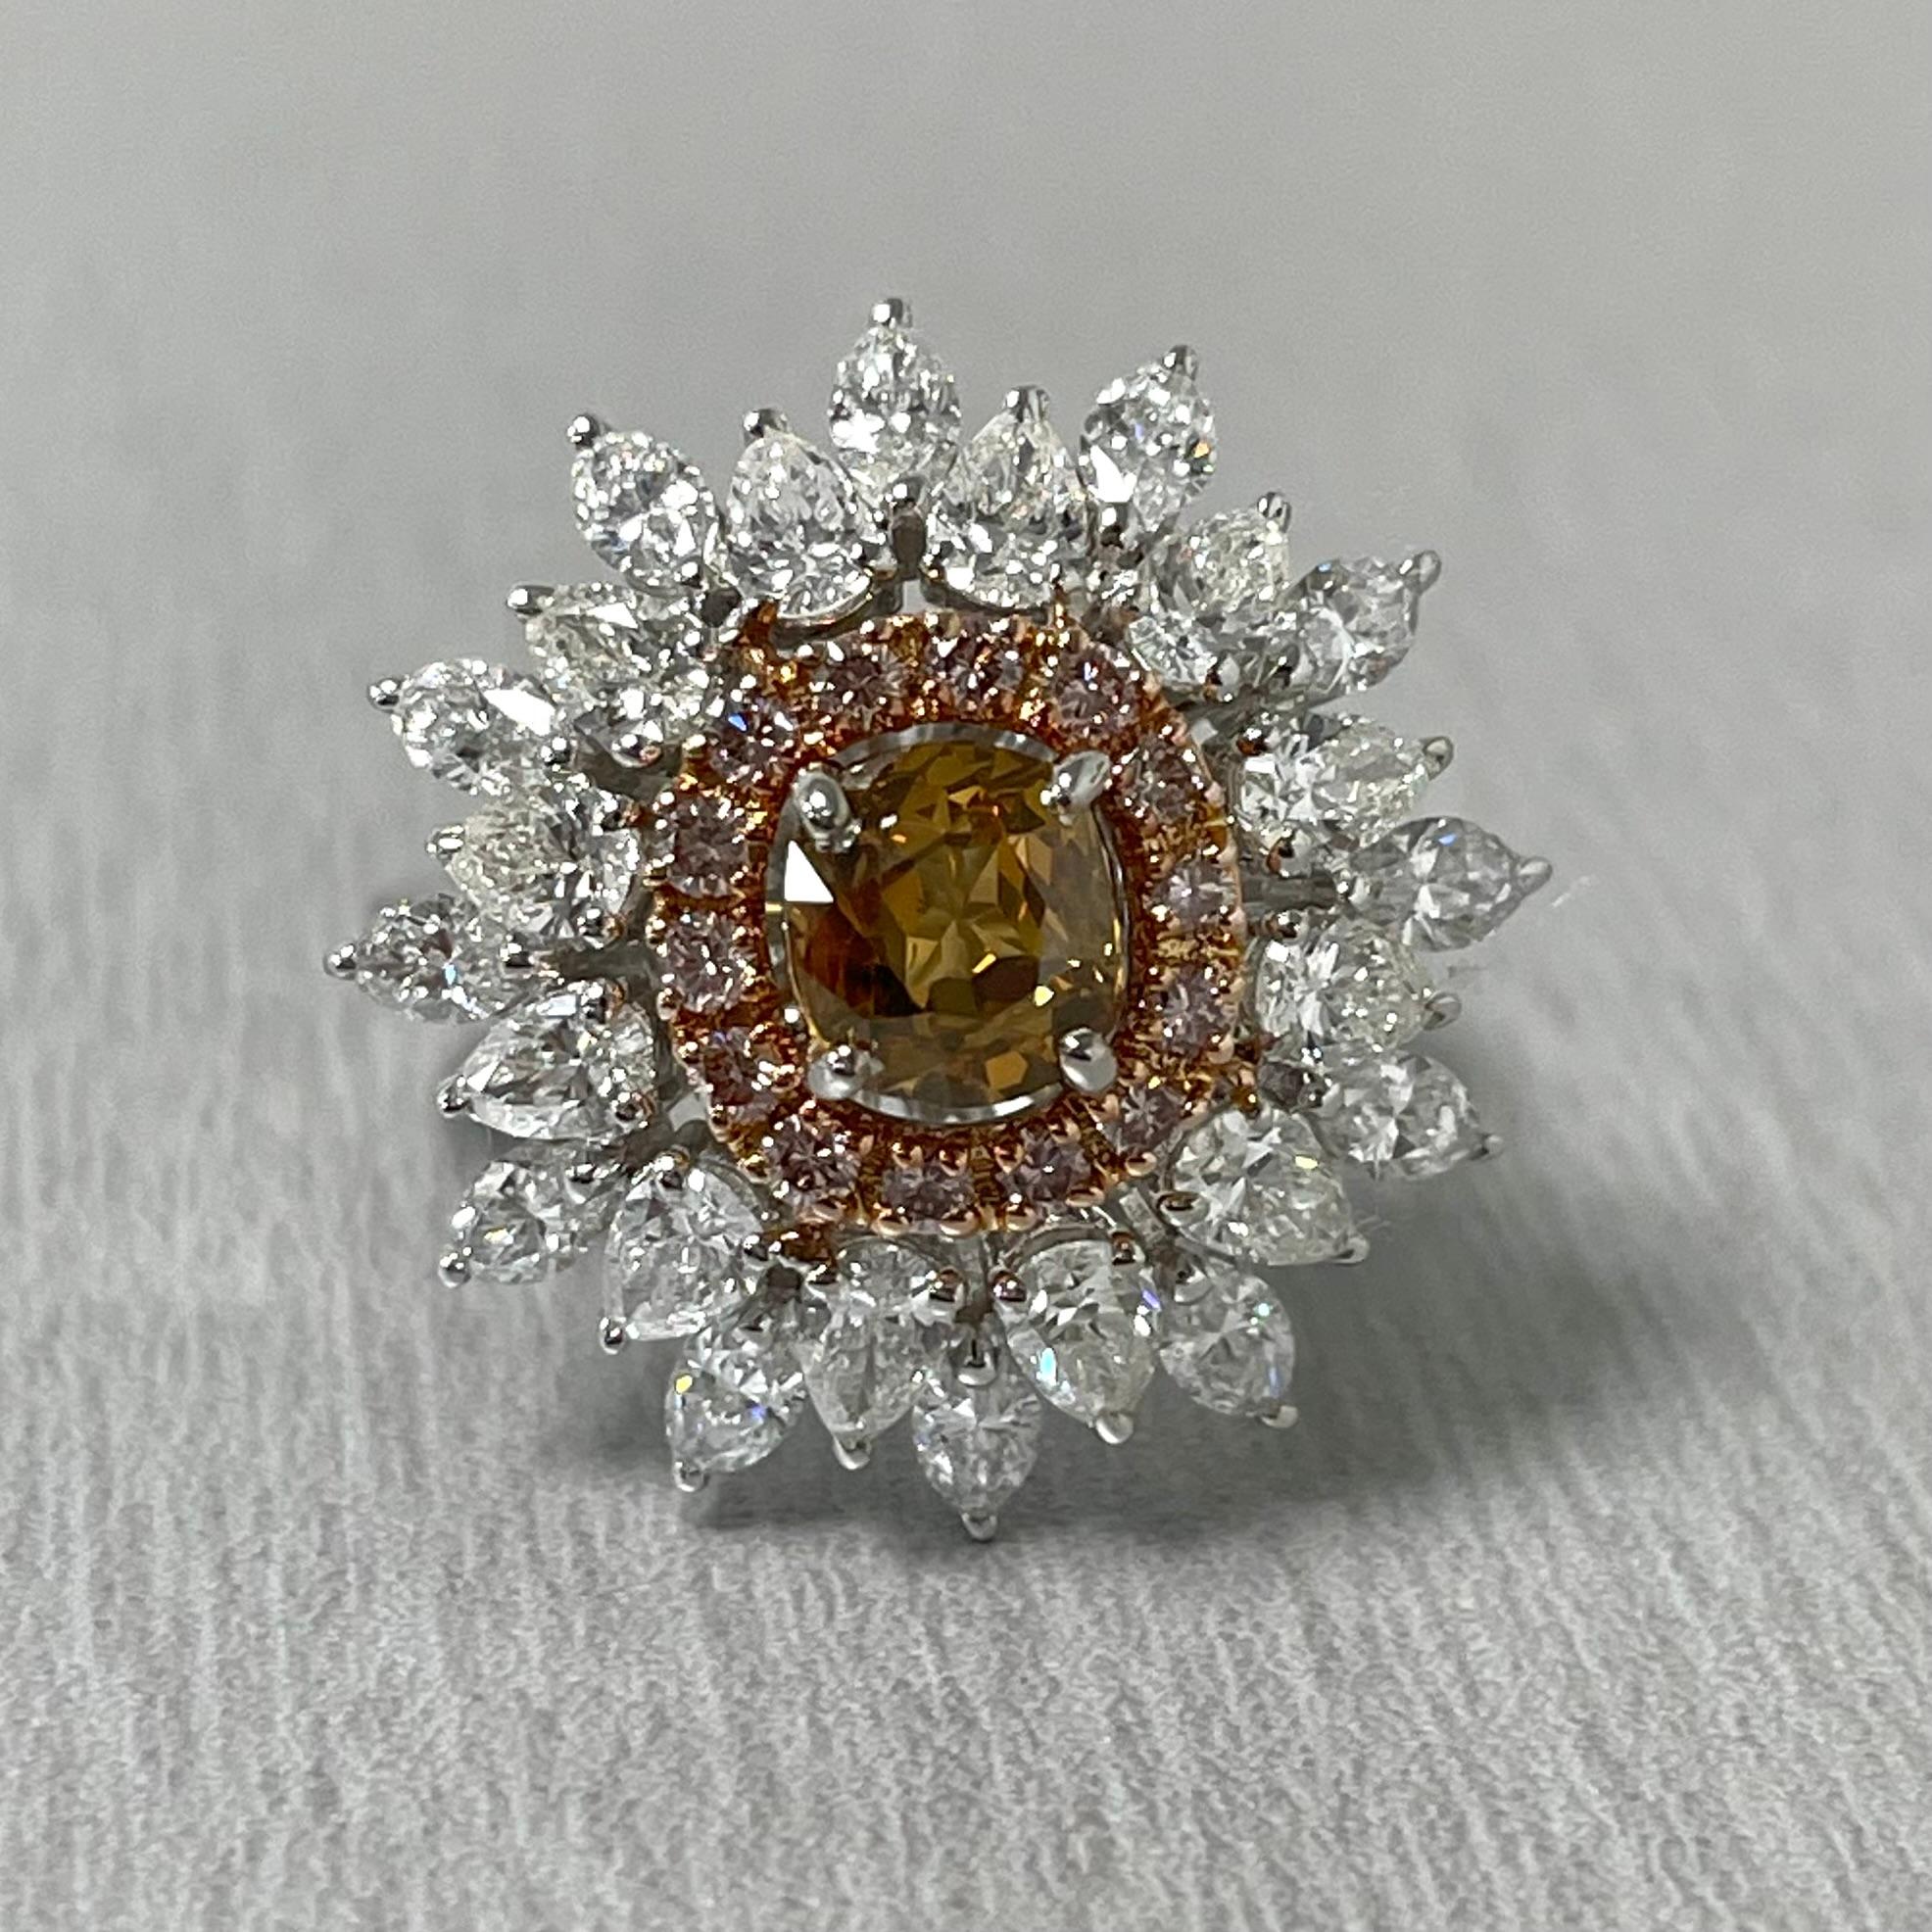 Contemporary Beauvince Blossoms Diamond Cocktail Ring '3.09 Ct Diamonds' in Gold For Sale